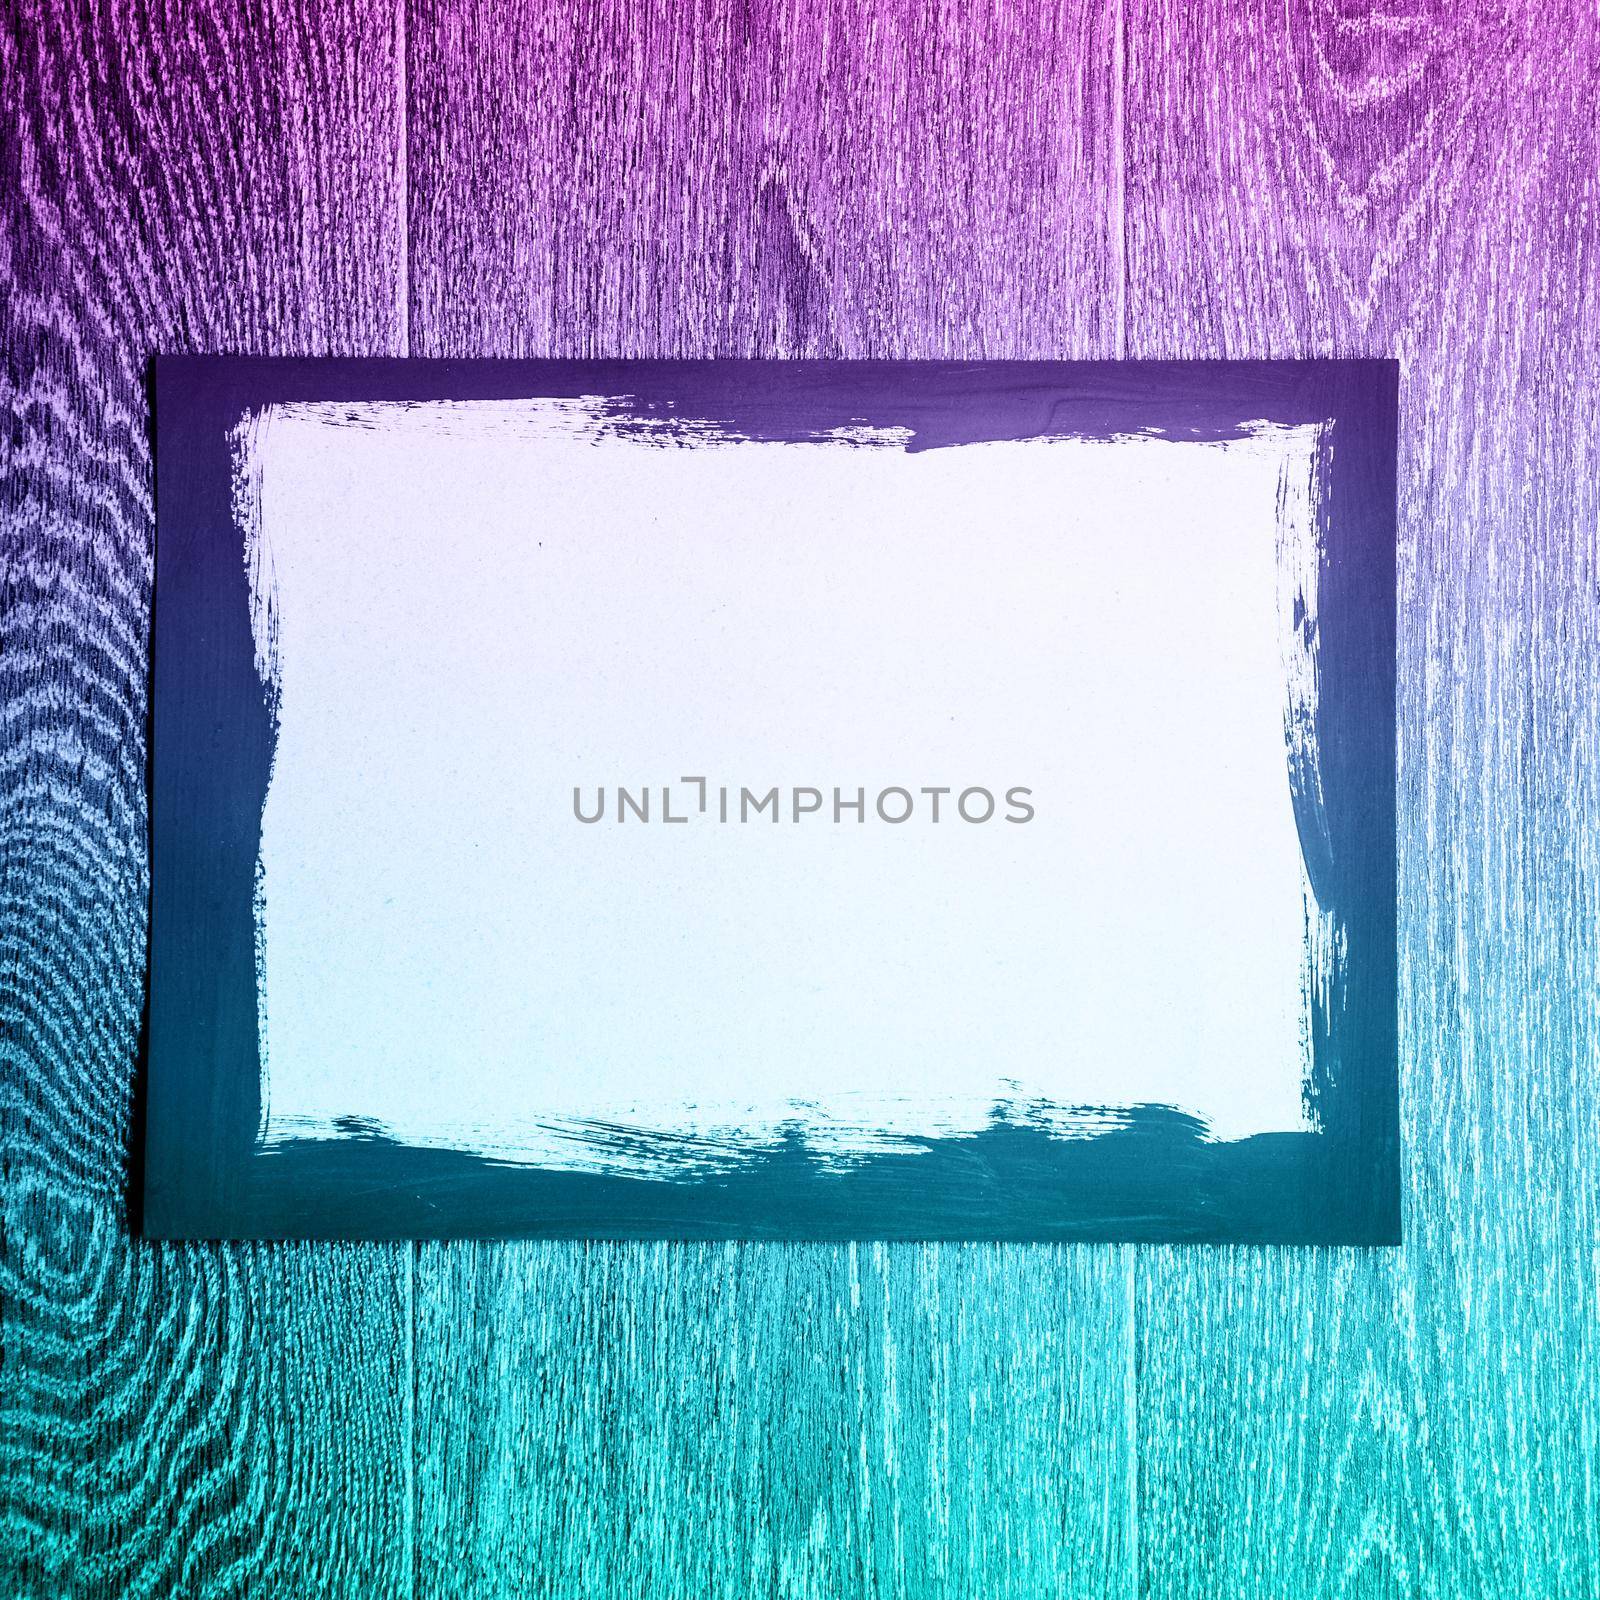 Black painted frame on white paper on wooden background with neon light - image